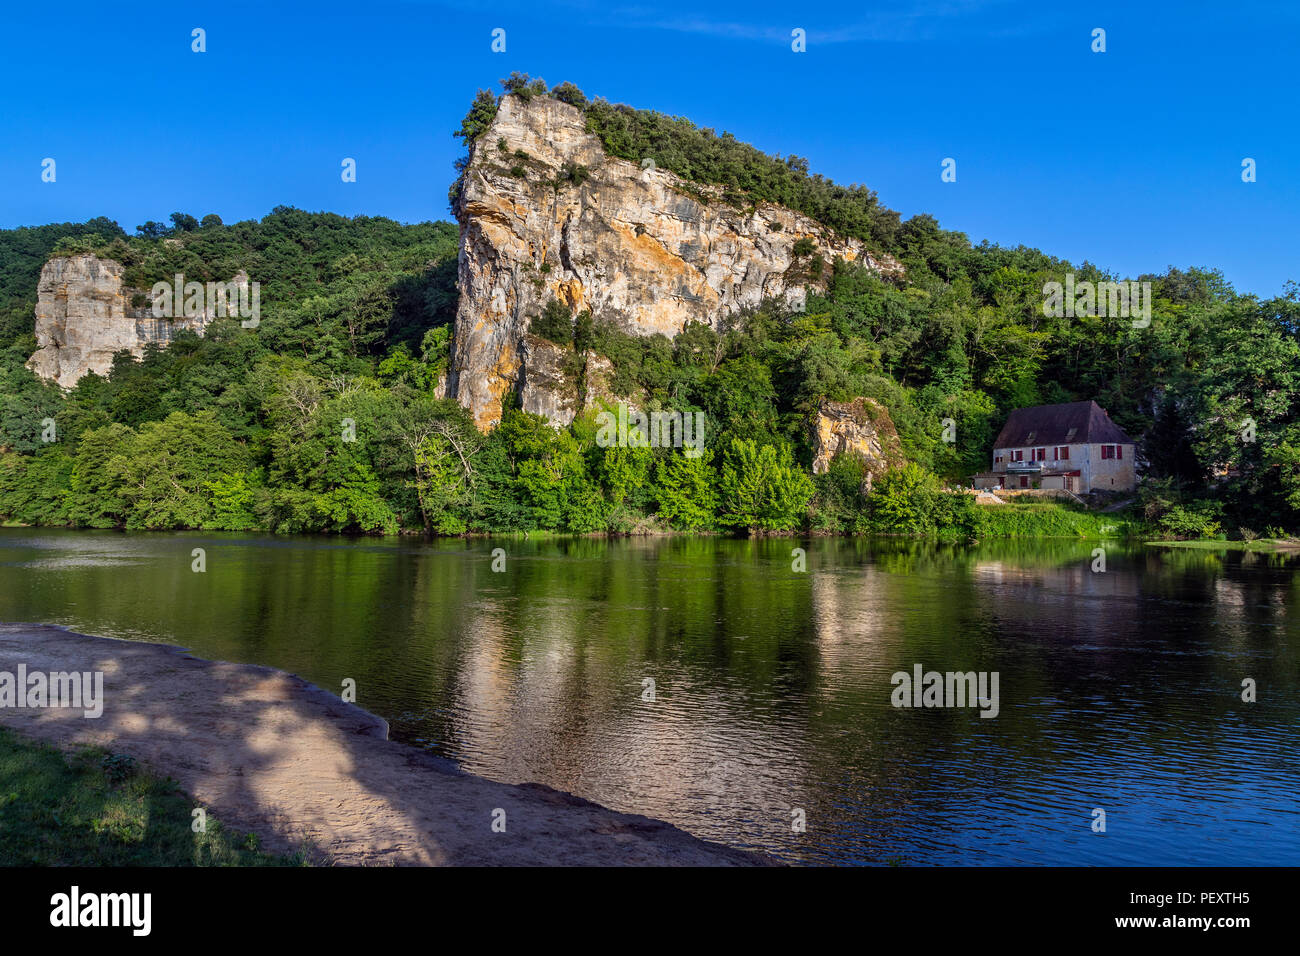 Scenic landscape on the Dordogne River in the Nouvelle-Aquitaine region of France Stock Photo